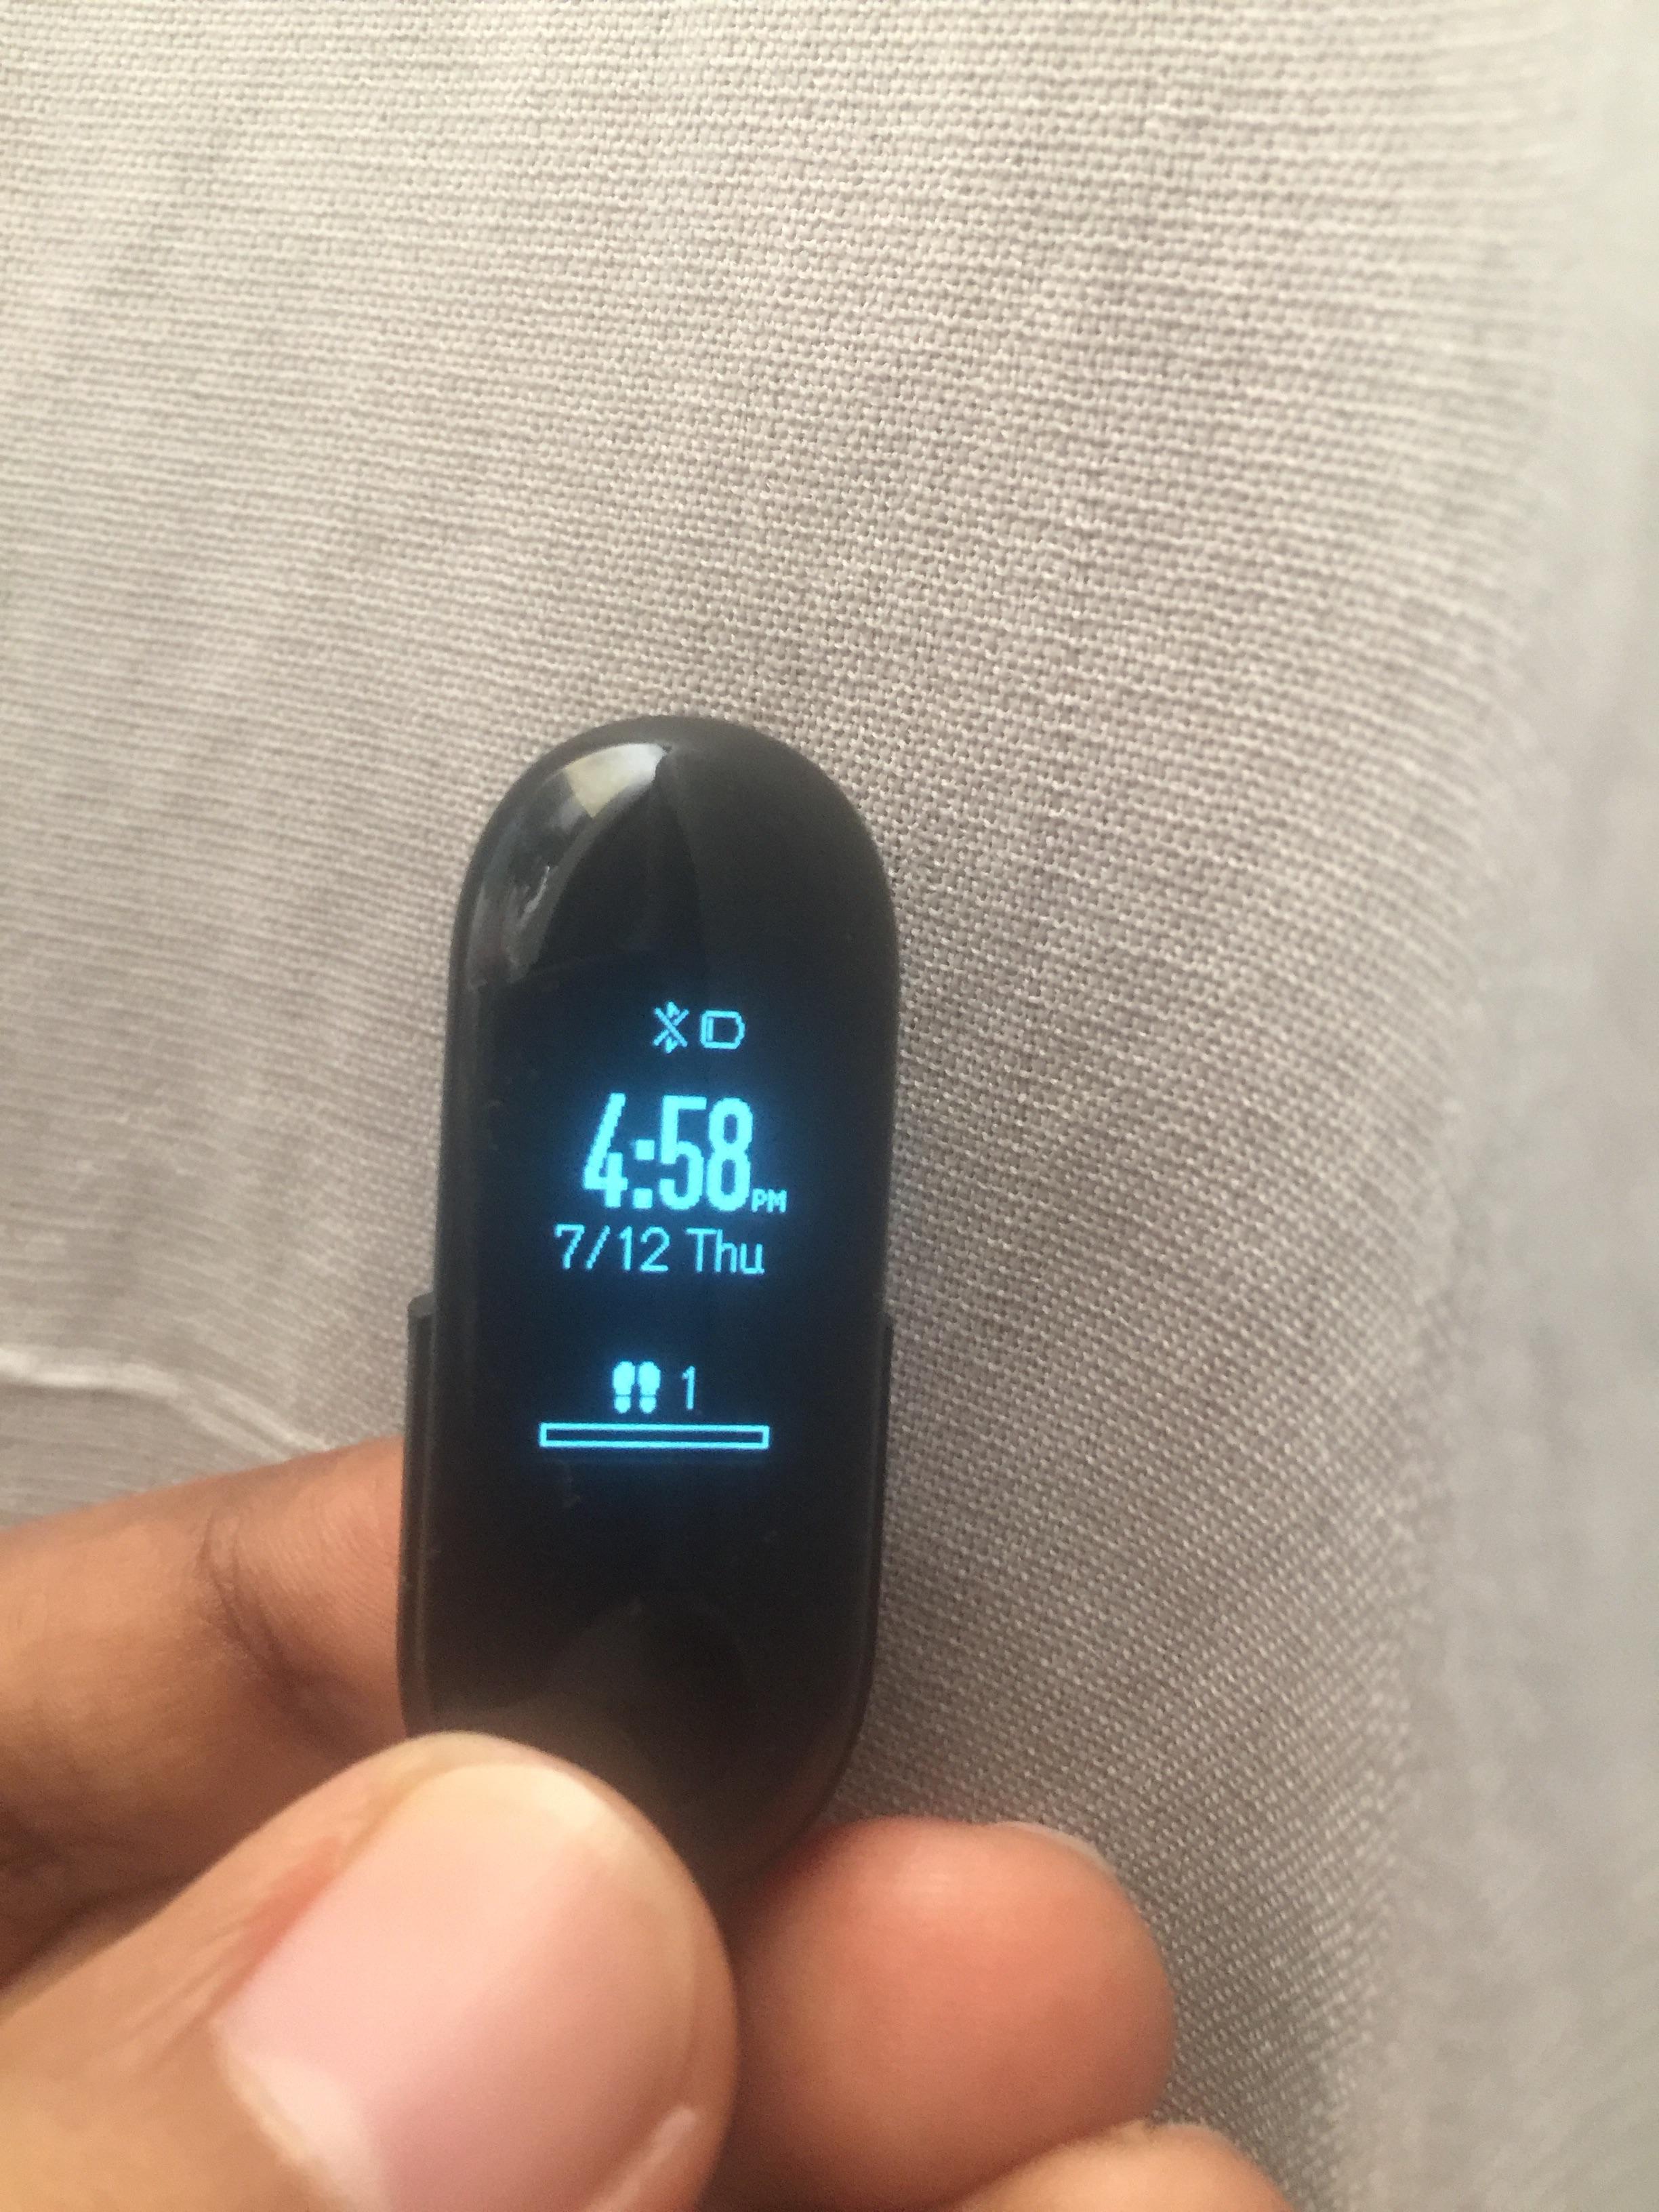 how to pair mi band 3 after factory reset